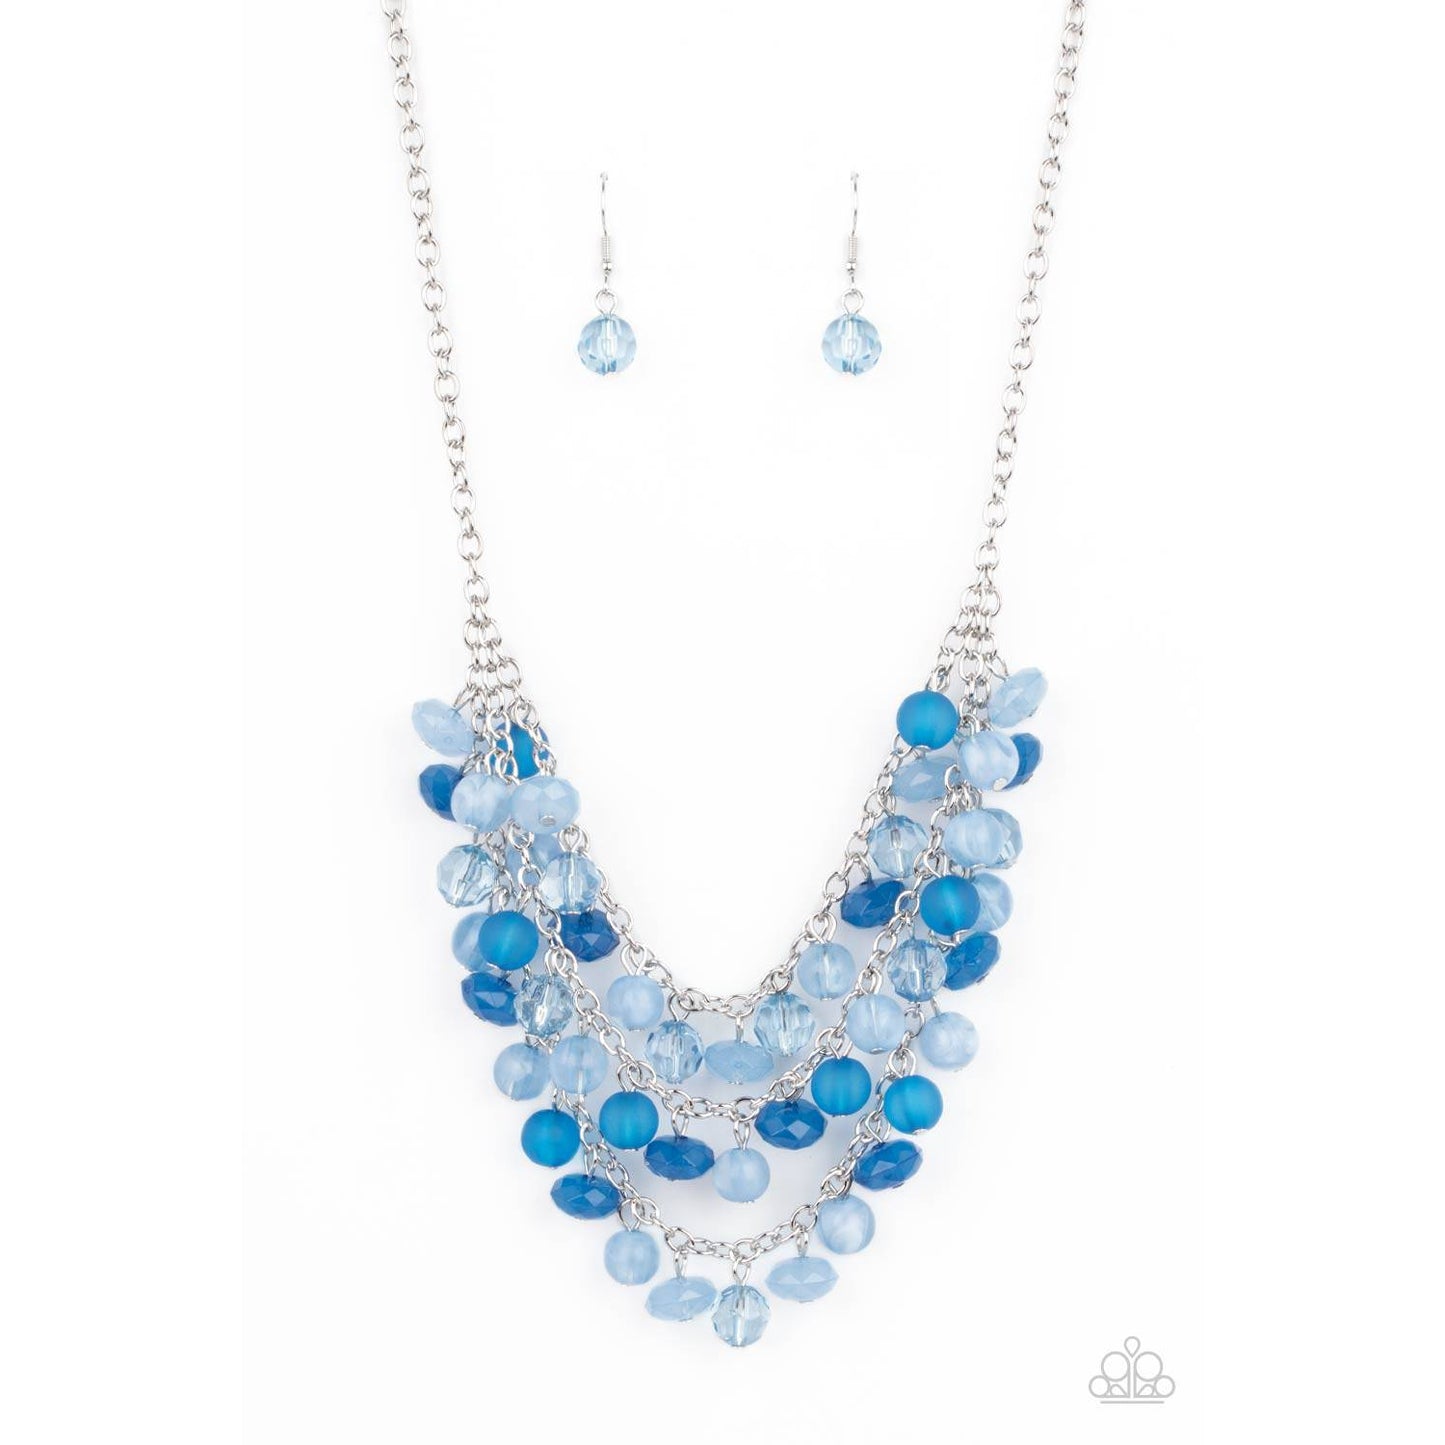 Fairytale Timelessness - Blue Crystal-like Beads Necklace - Paparazzi Accessories - GlaMarous Titi Jewels